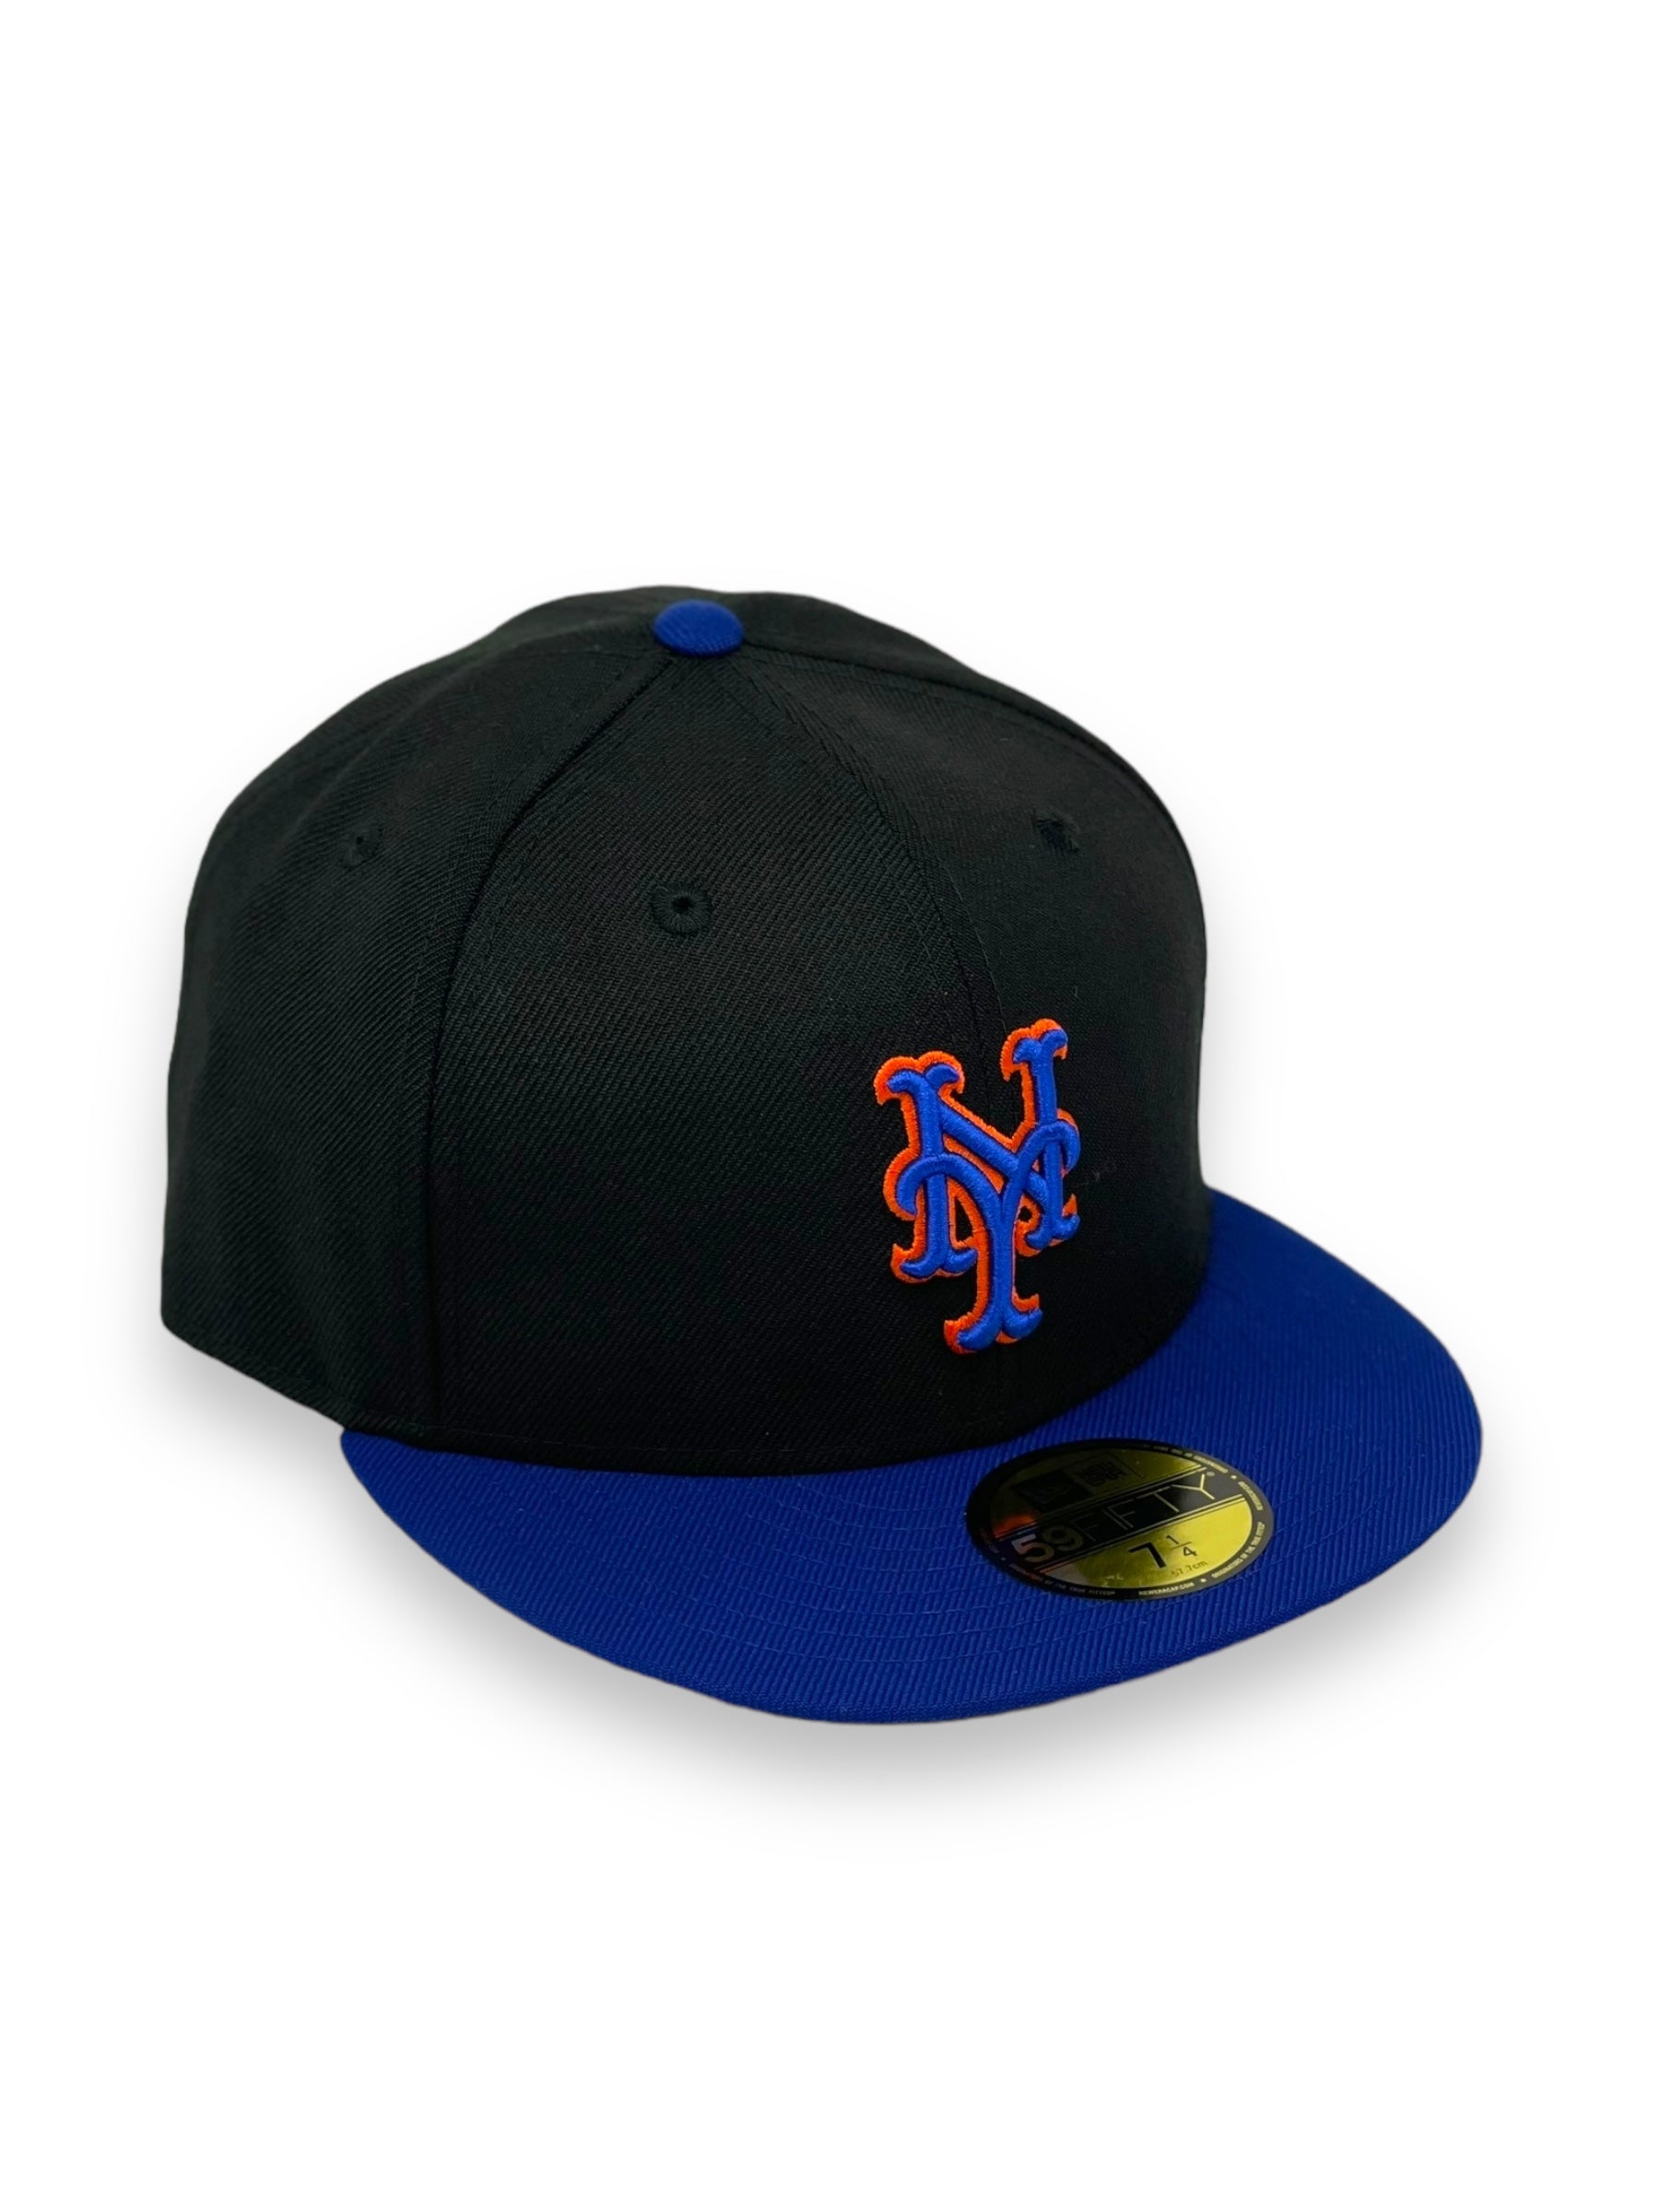 NEW YORK METS (BLACK/ROYAL) (ROAD 2001-2006) NEW ERA 59FIFTY FITTED